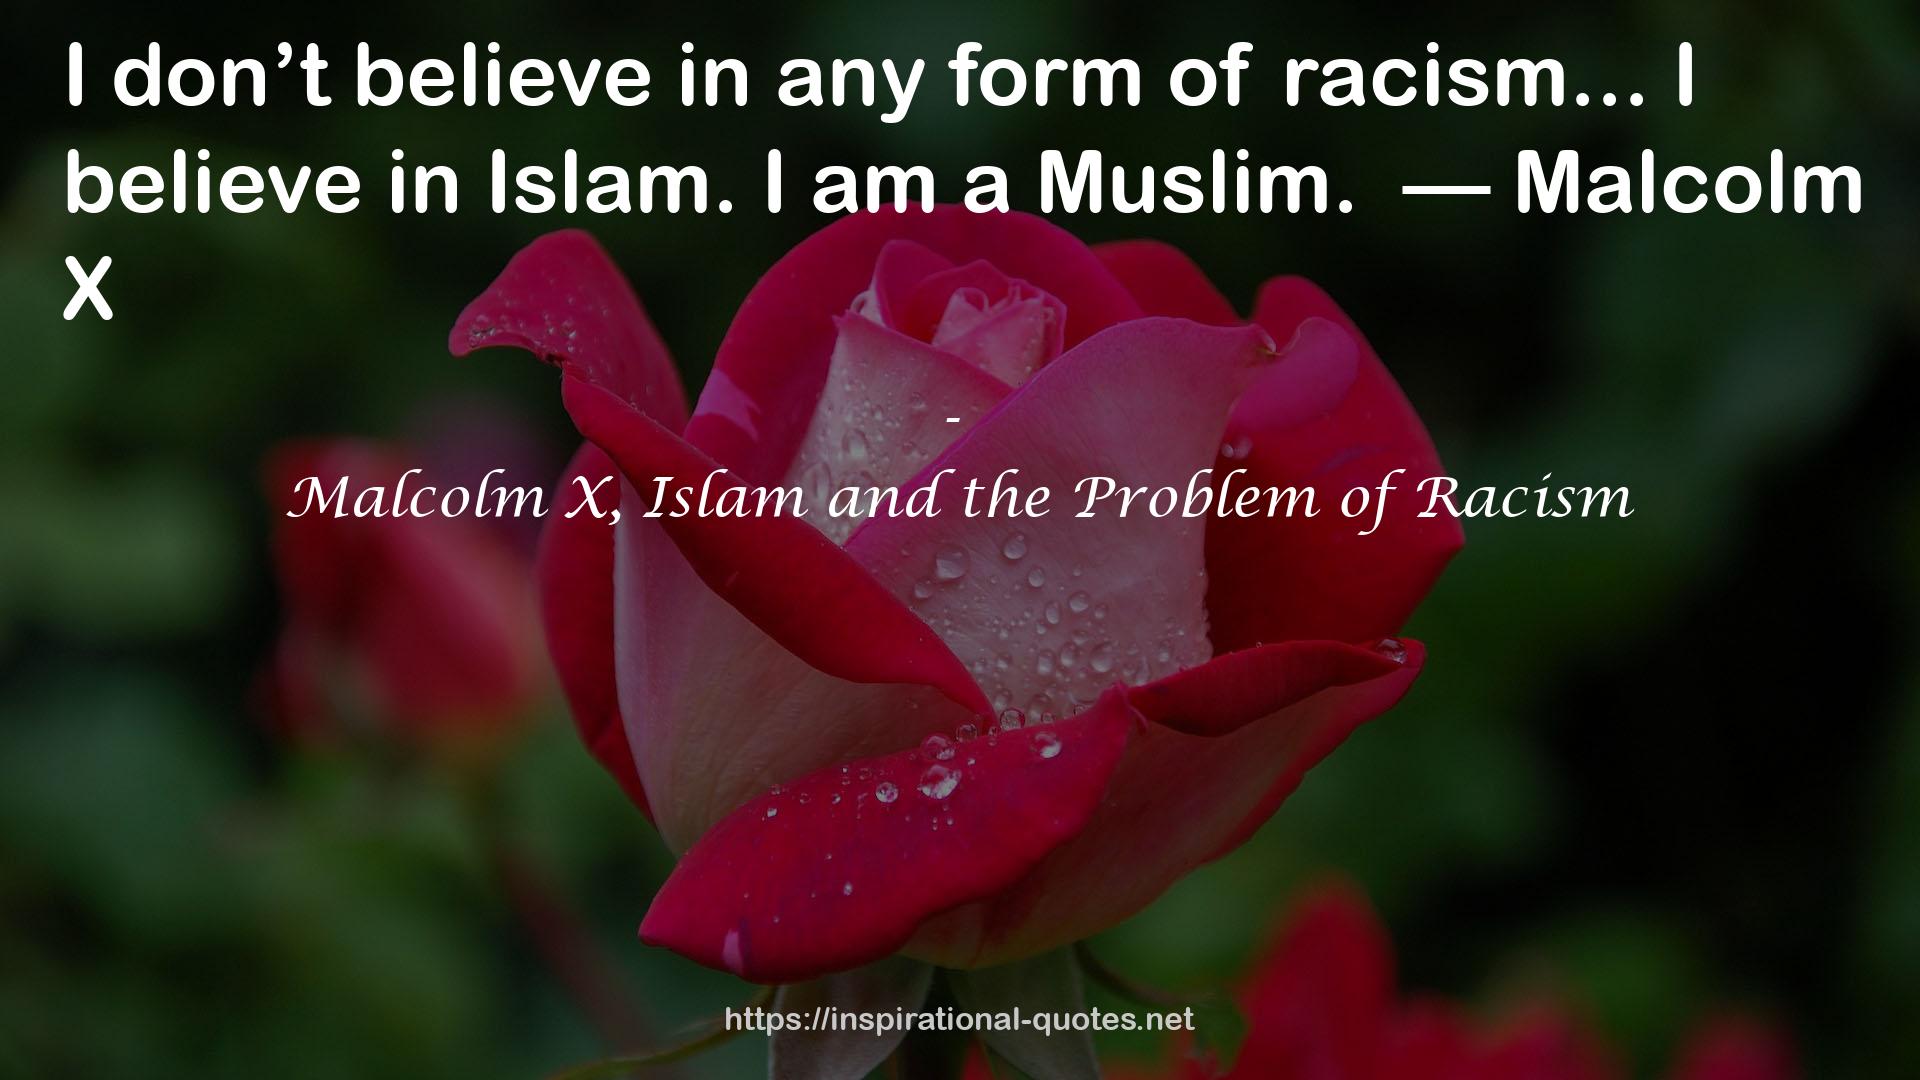 Malcolm X, Islam and the Problem of Racism QUOTES